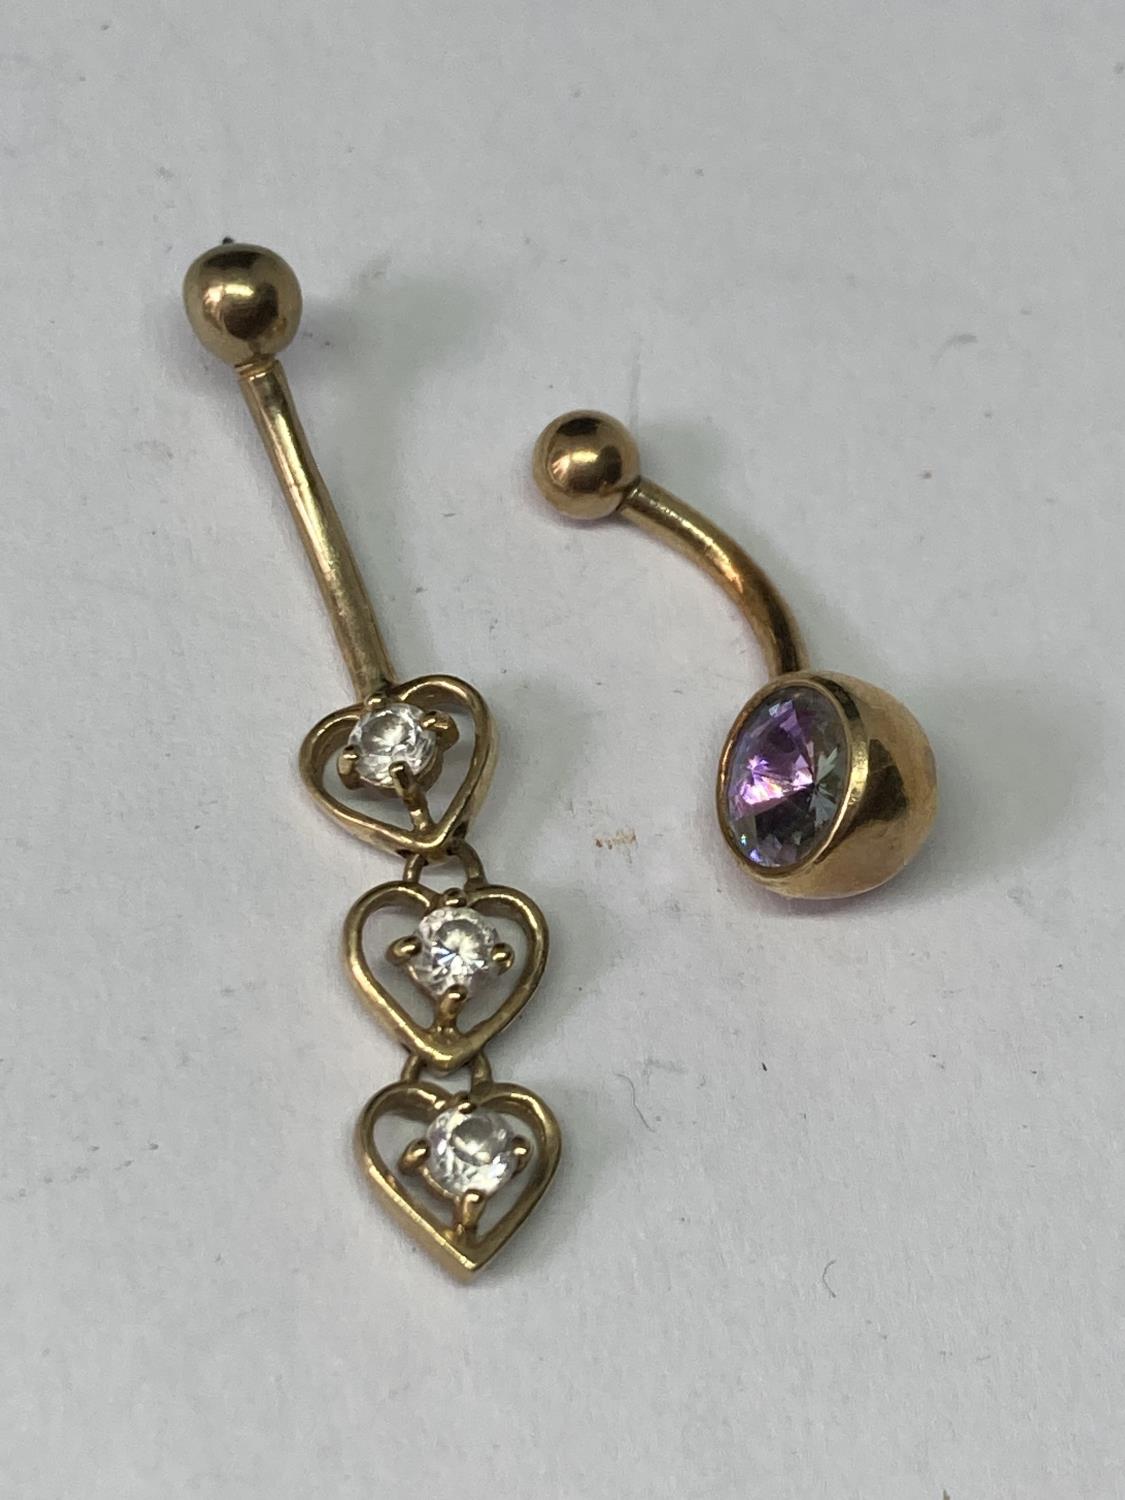 FOUR 9 CARAT GOLD BELLY BUTTON BARS - Image 3 of 3